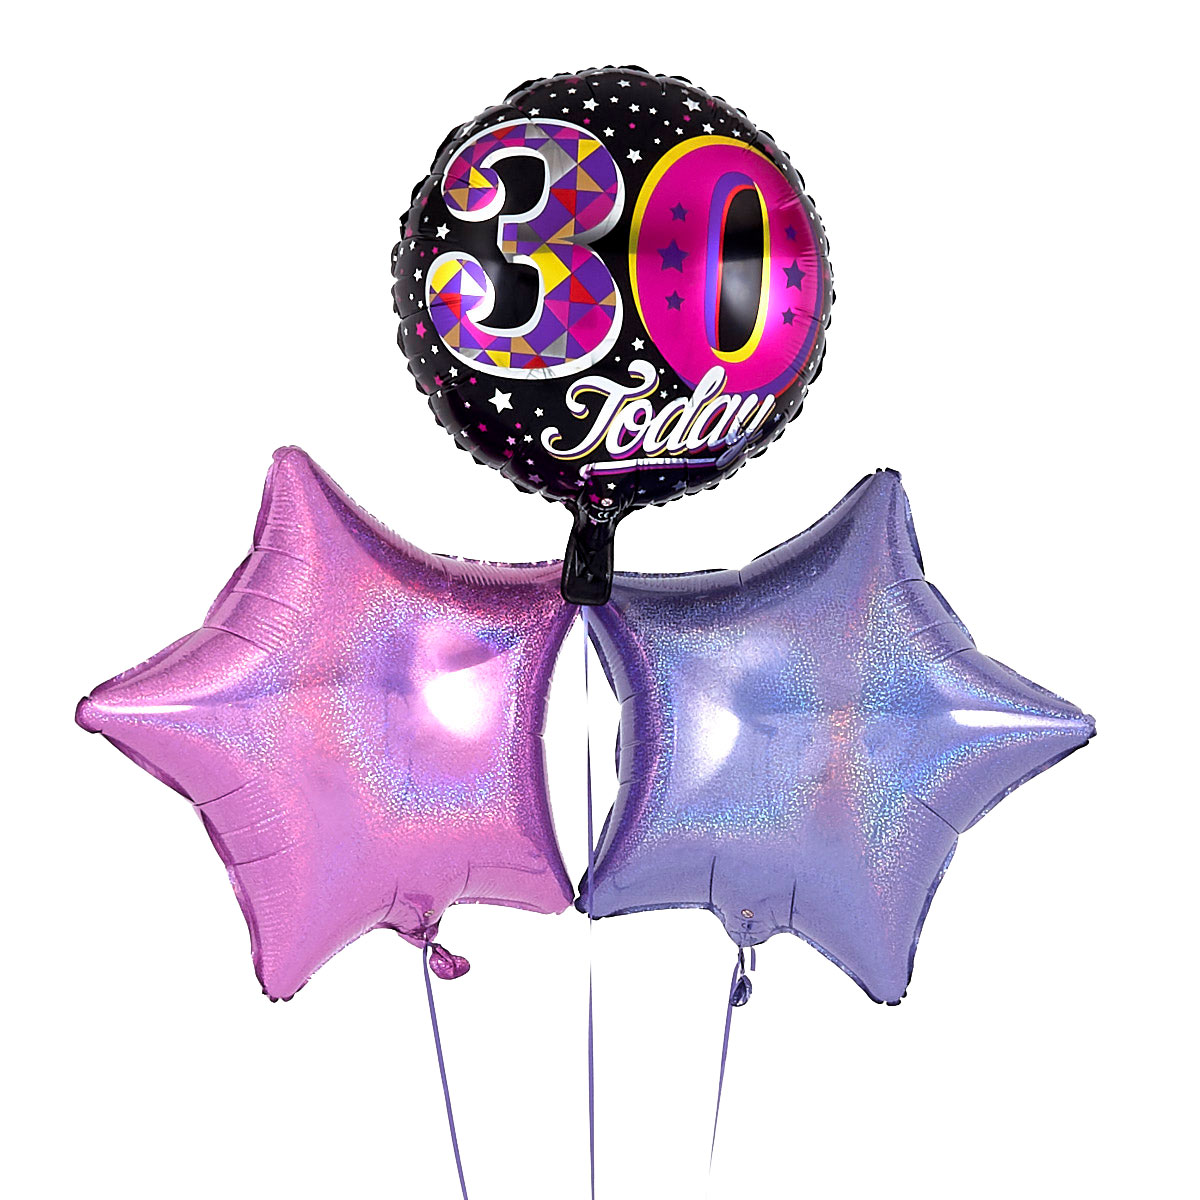 30th Birthday Black Balloon Pink Balloon Bouquet - DELIVERED INFLATED!